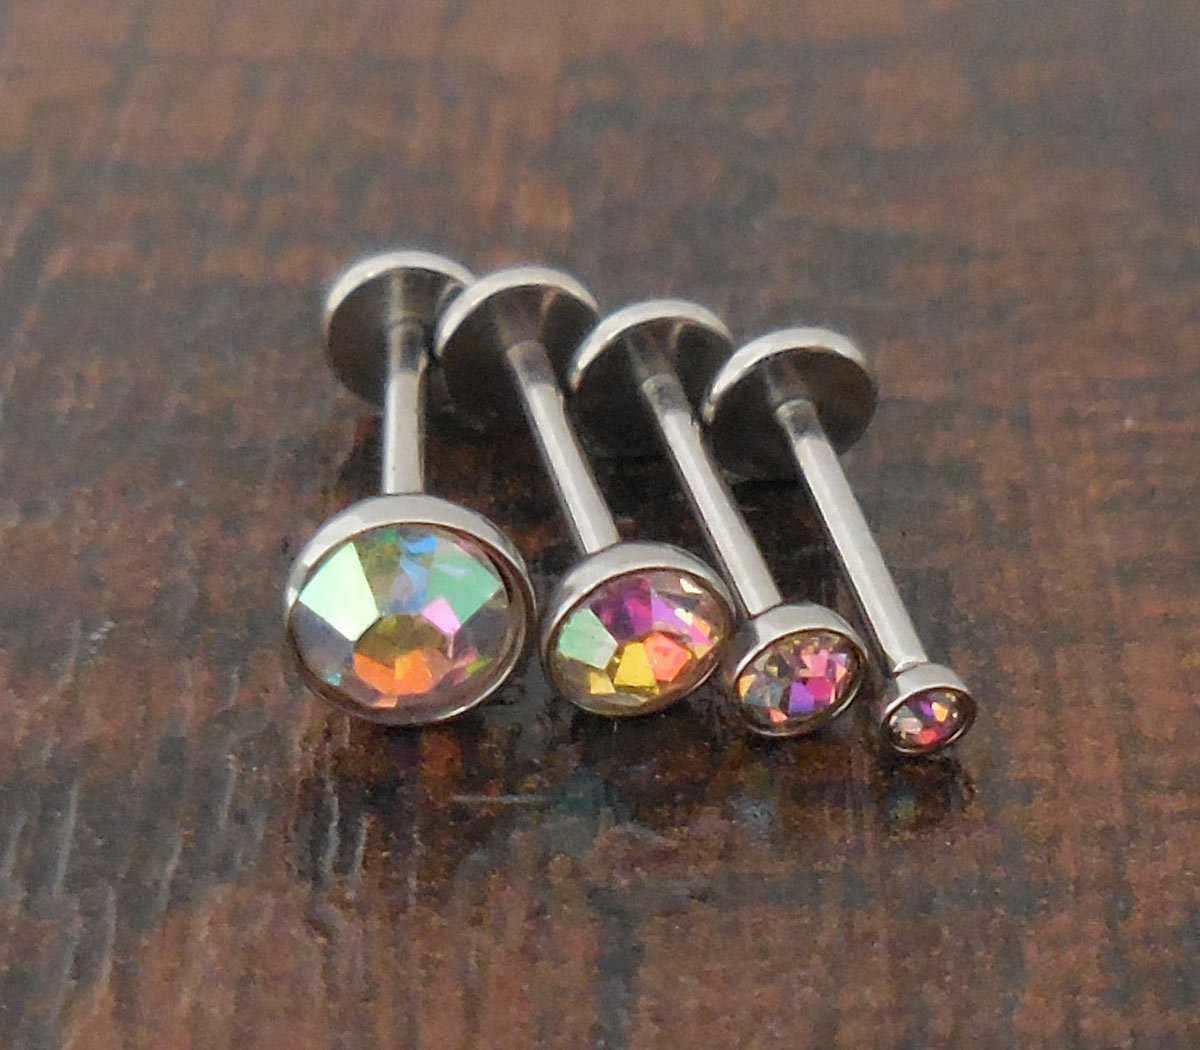 AB Aurora Borealis 6mm or 8mm 18g 2, 3, 4 or 5mm Thread less Push Pin Tragus Triple Helix Earring Cartilage Labret Stainless Nose Ring